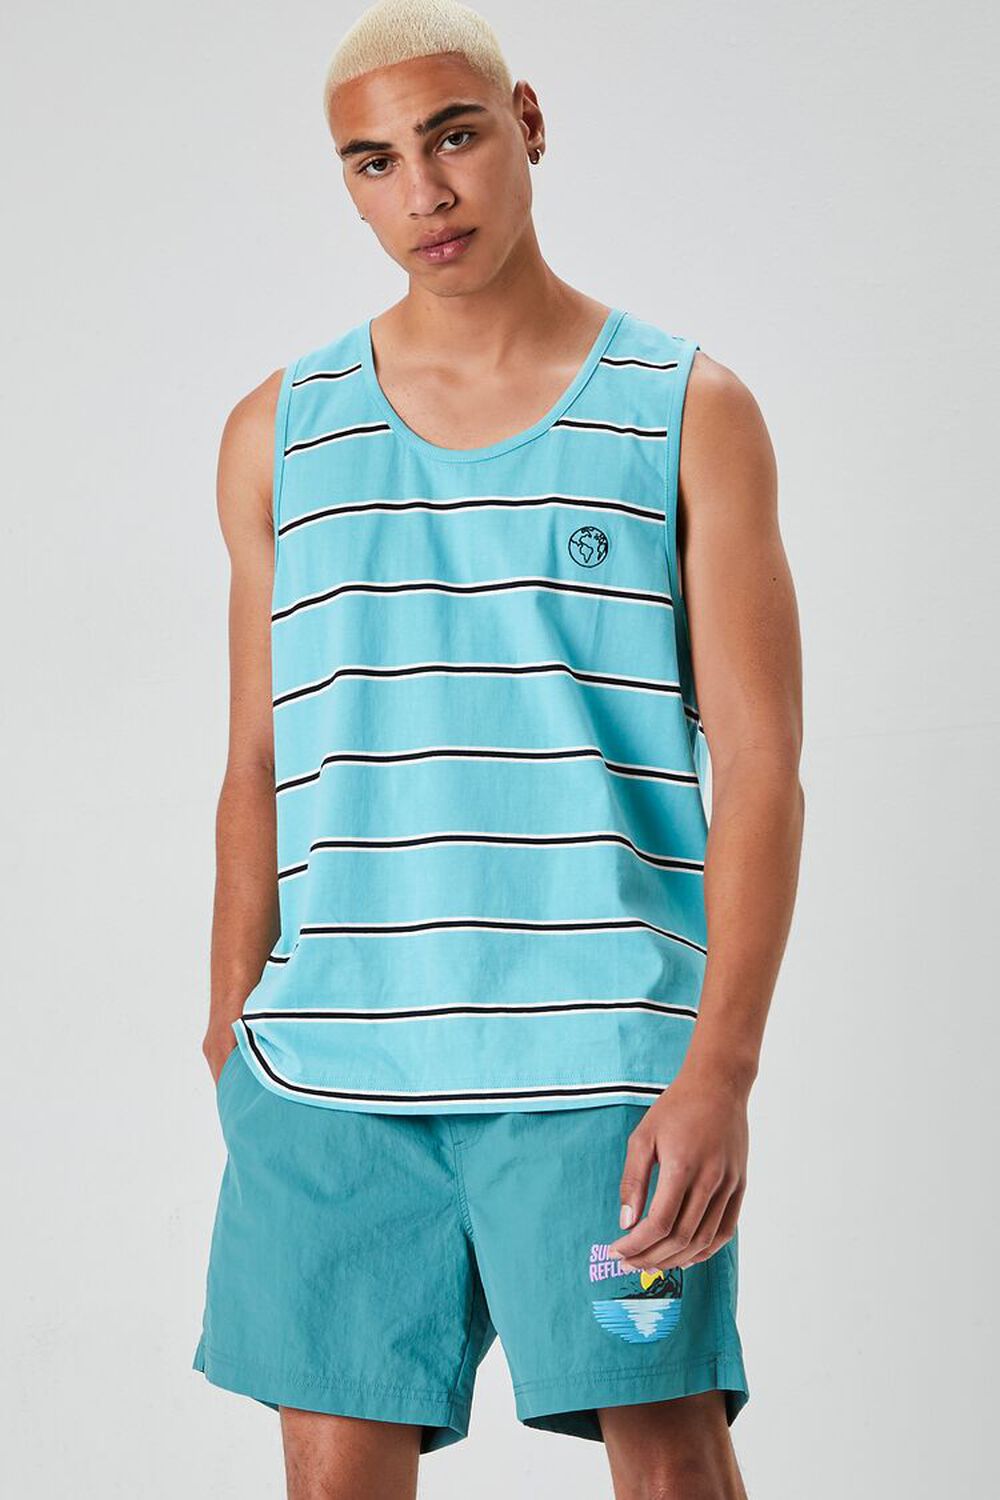 Embroidered Earth Striped Tank Top, image 1